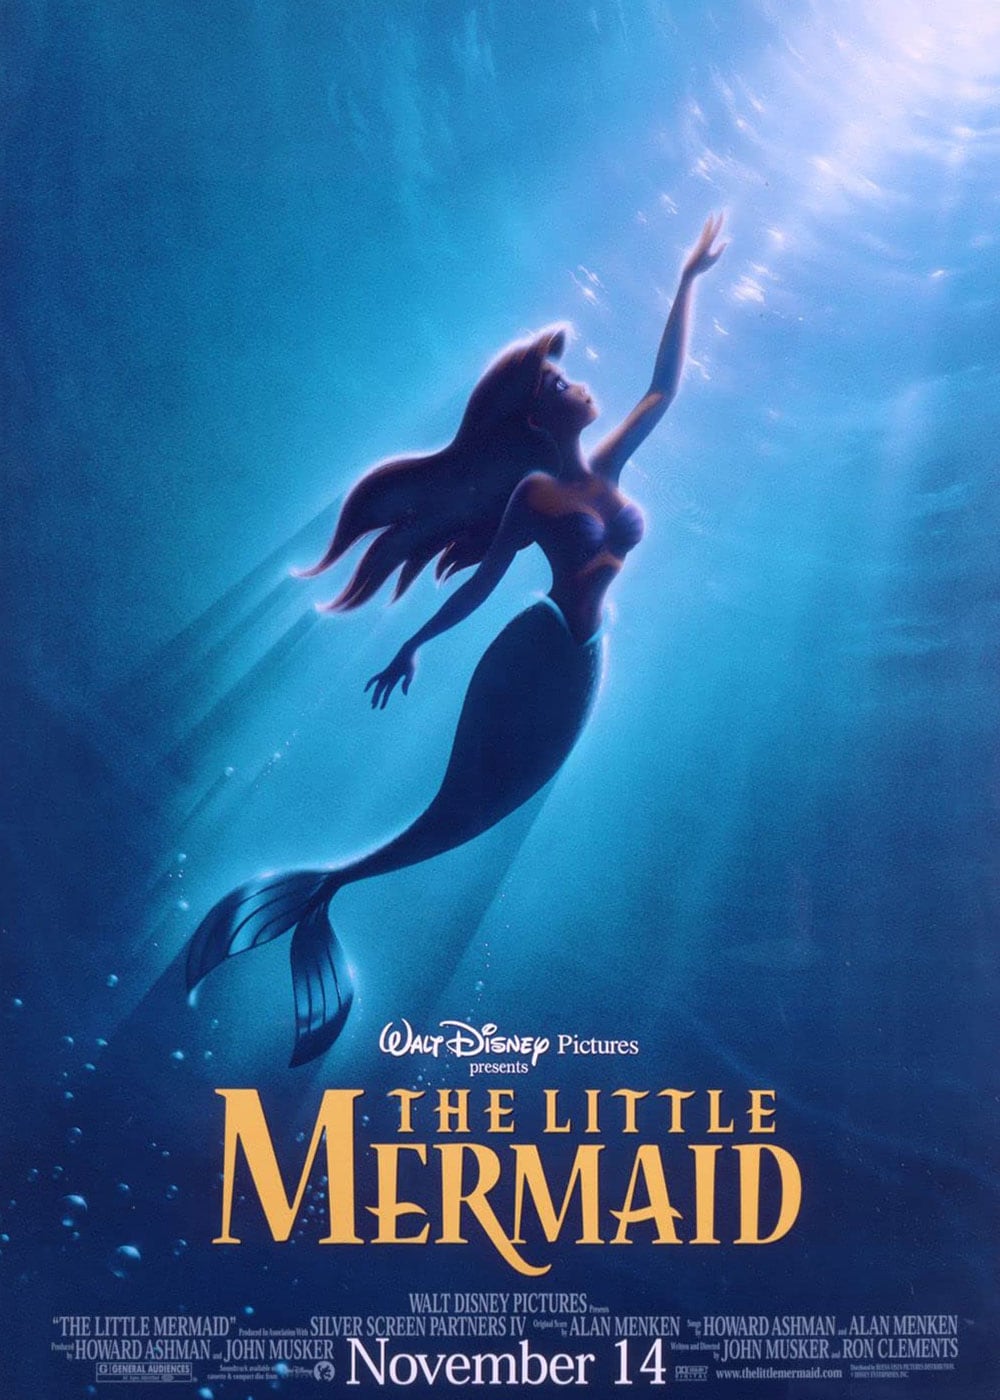 The Little Mermaid Movie (1989) | Release Date, Review, Cast, Trailer,  Watch Online at Disney+ Hotstar - Gadgets 360